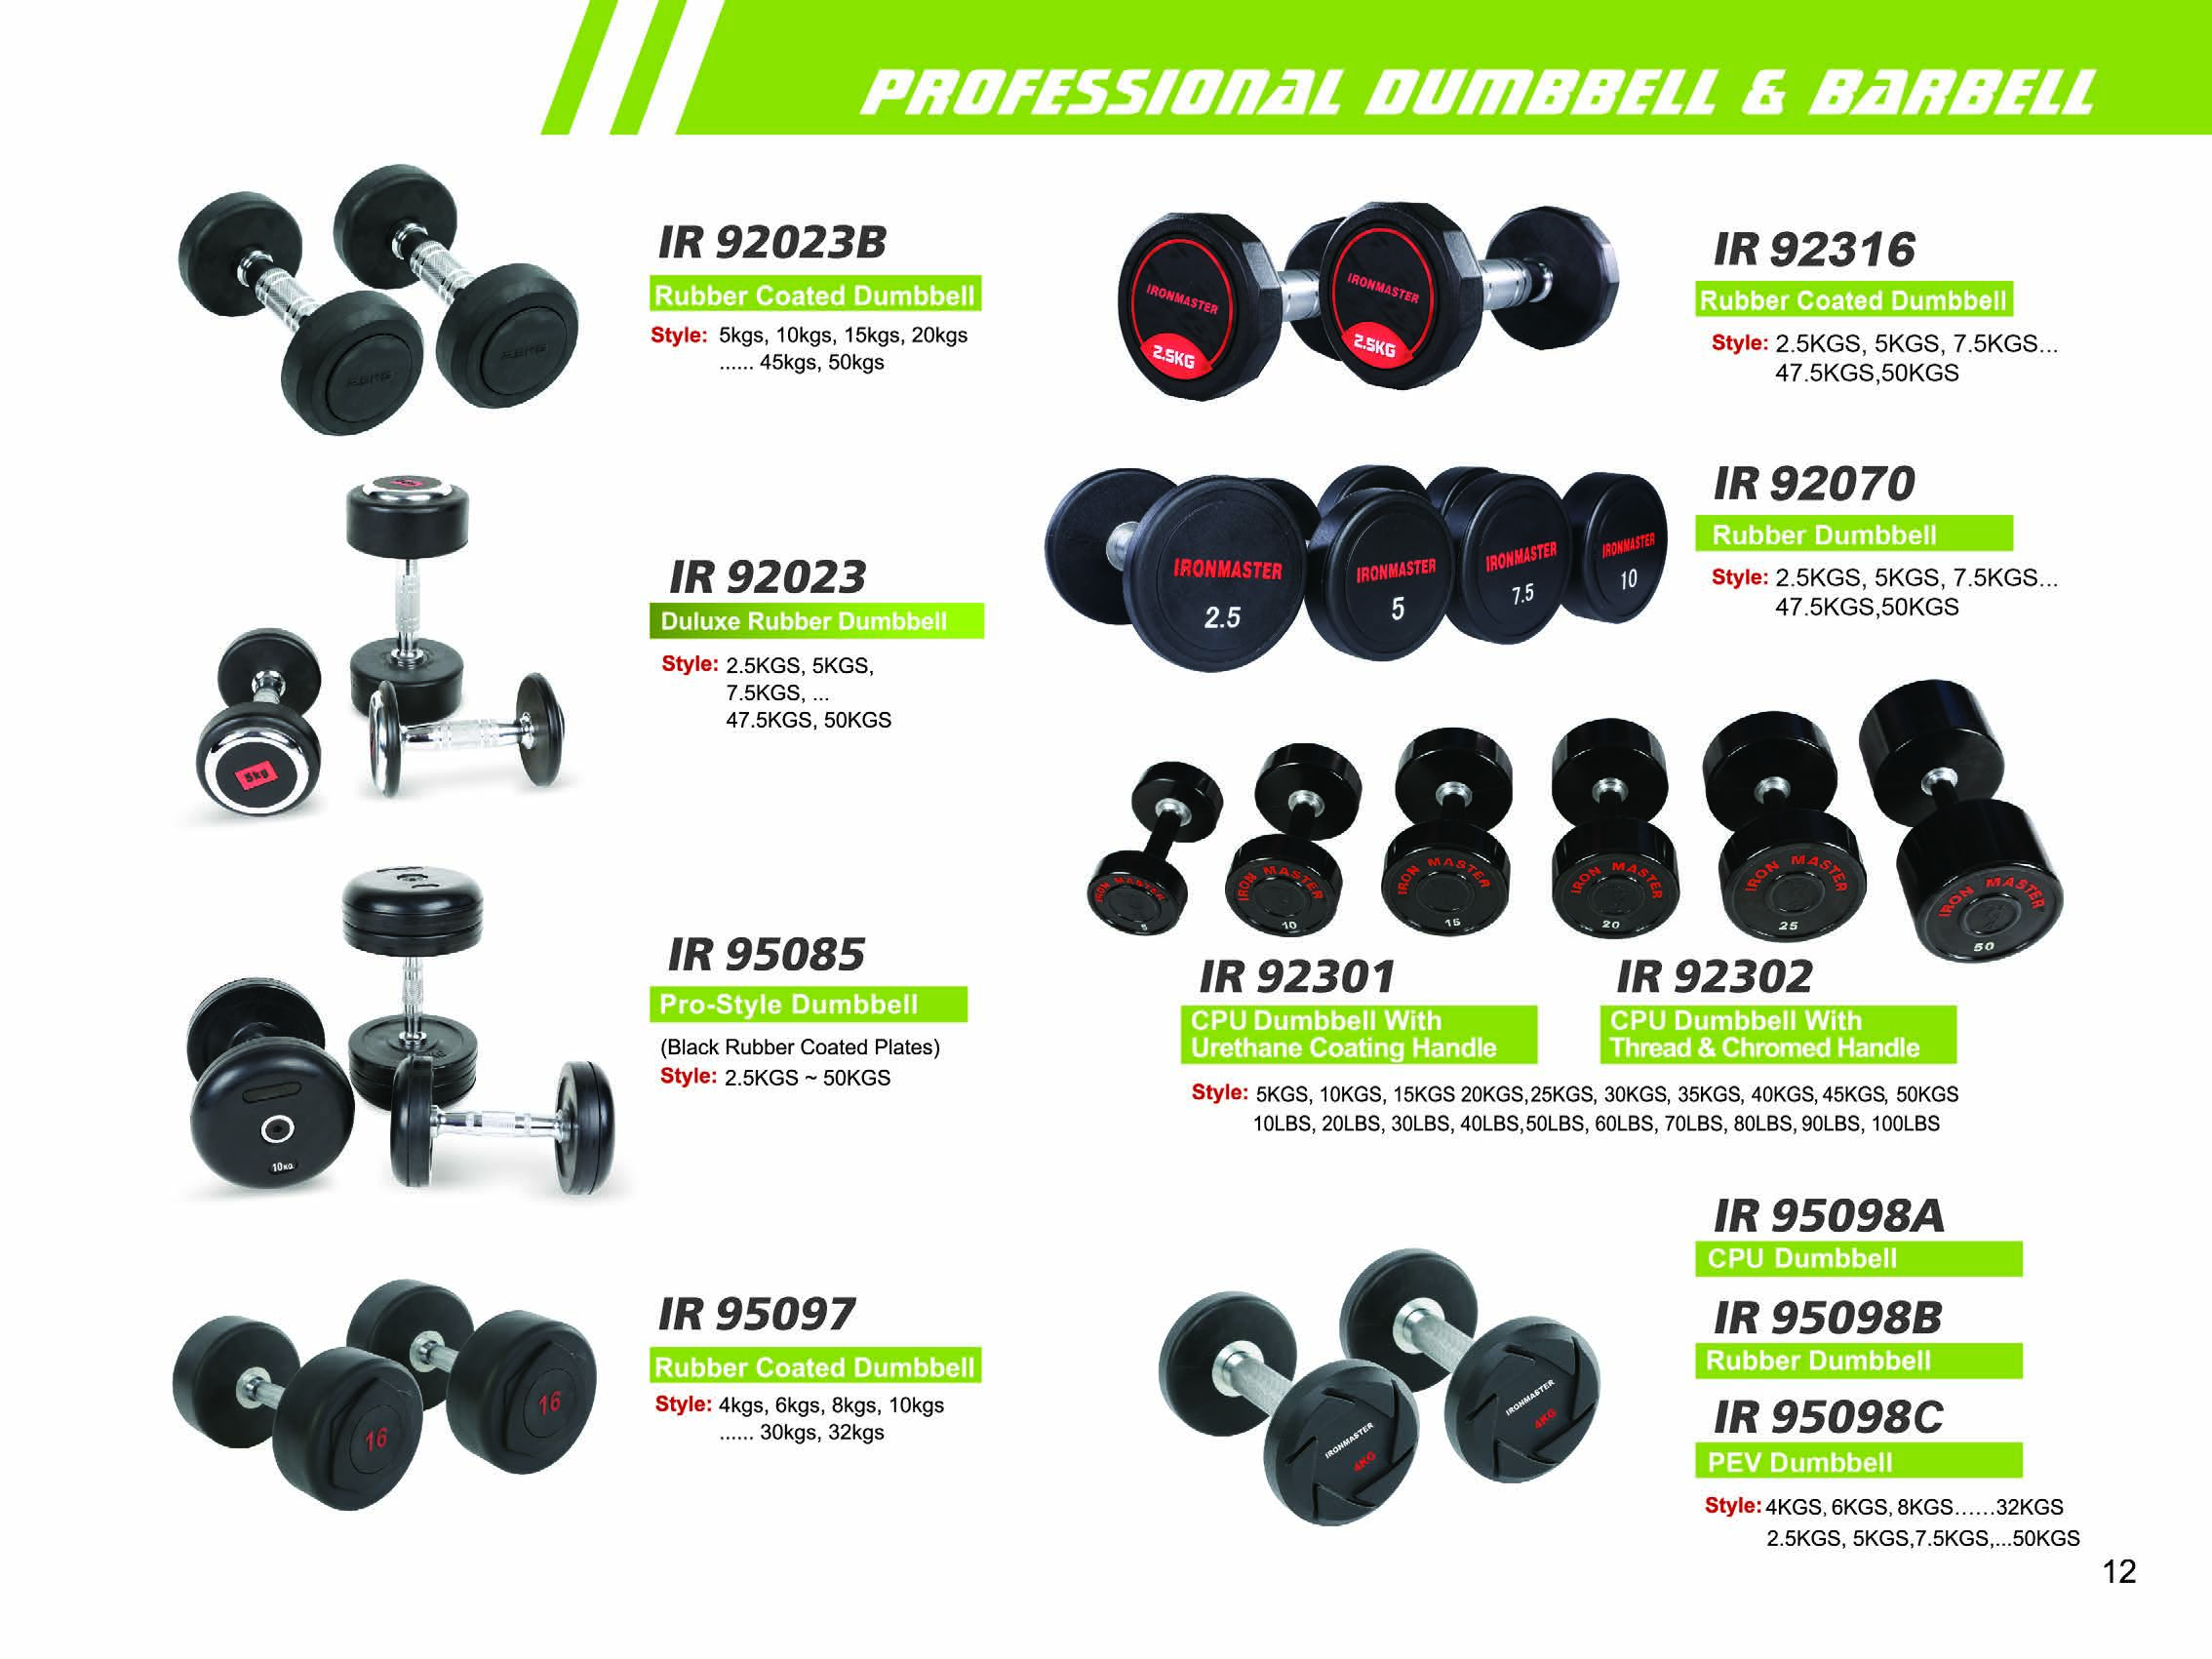 PROFESSIONAL DUMBBELL